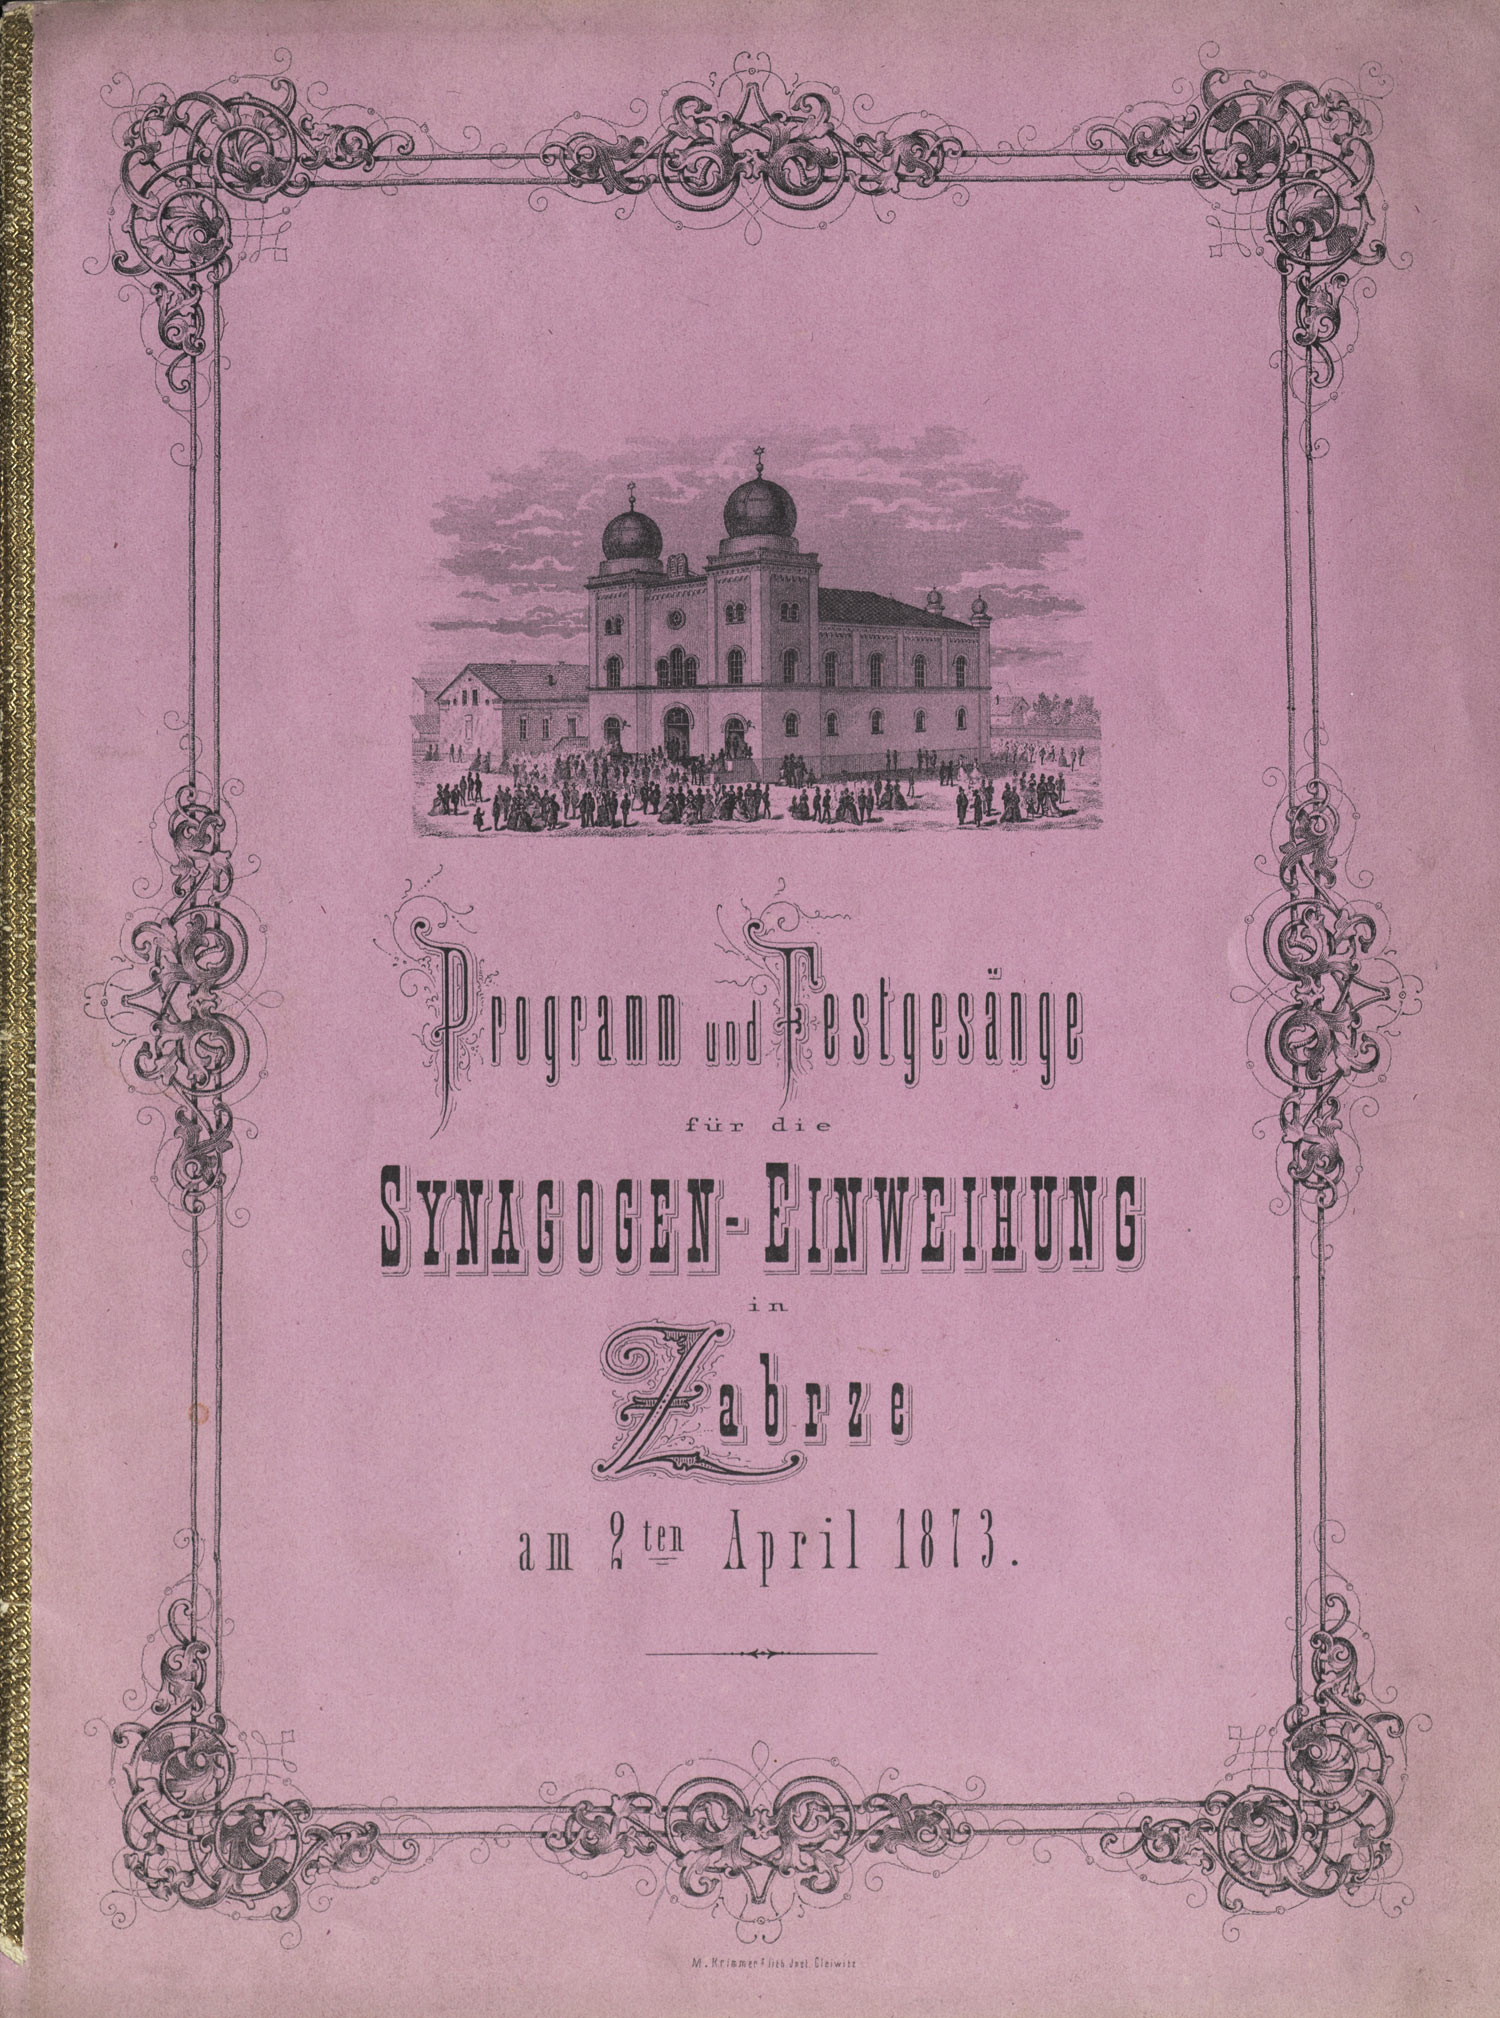 Cover of the program, with an illustration of the synagogue